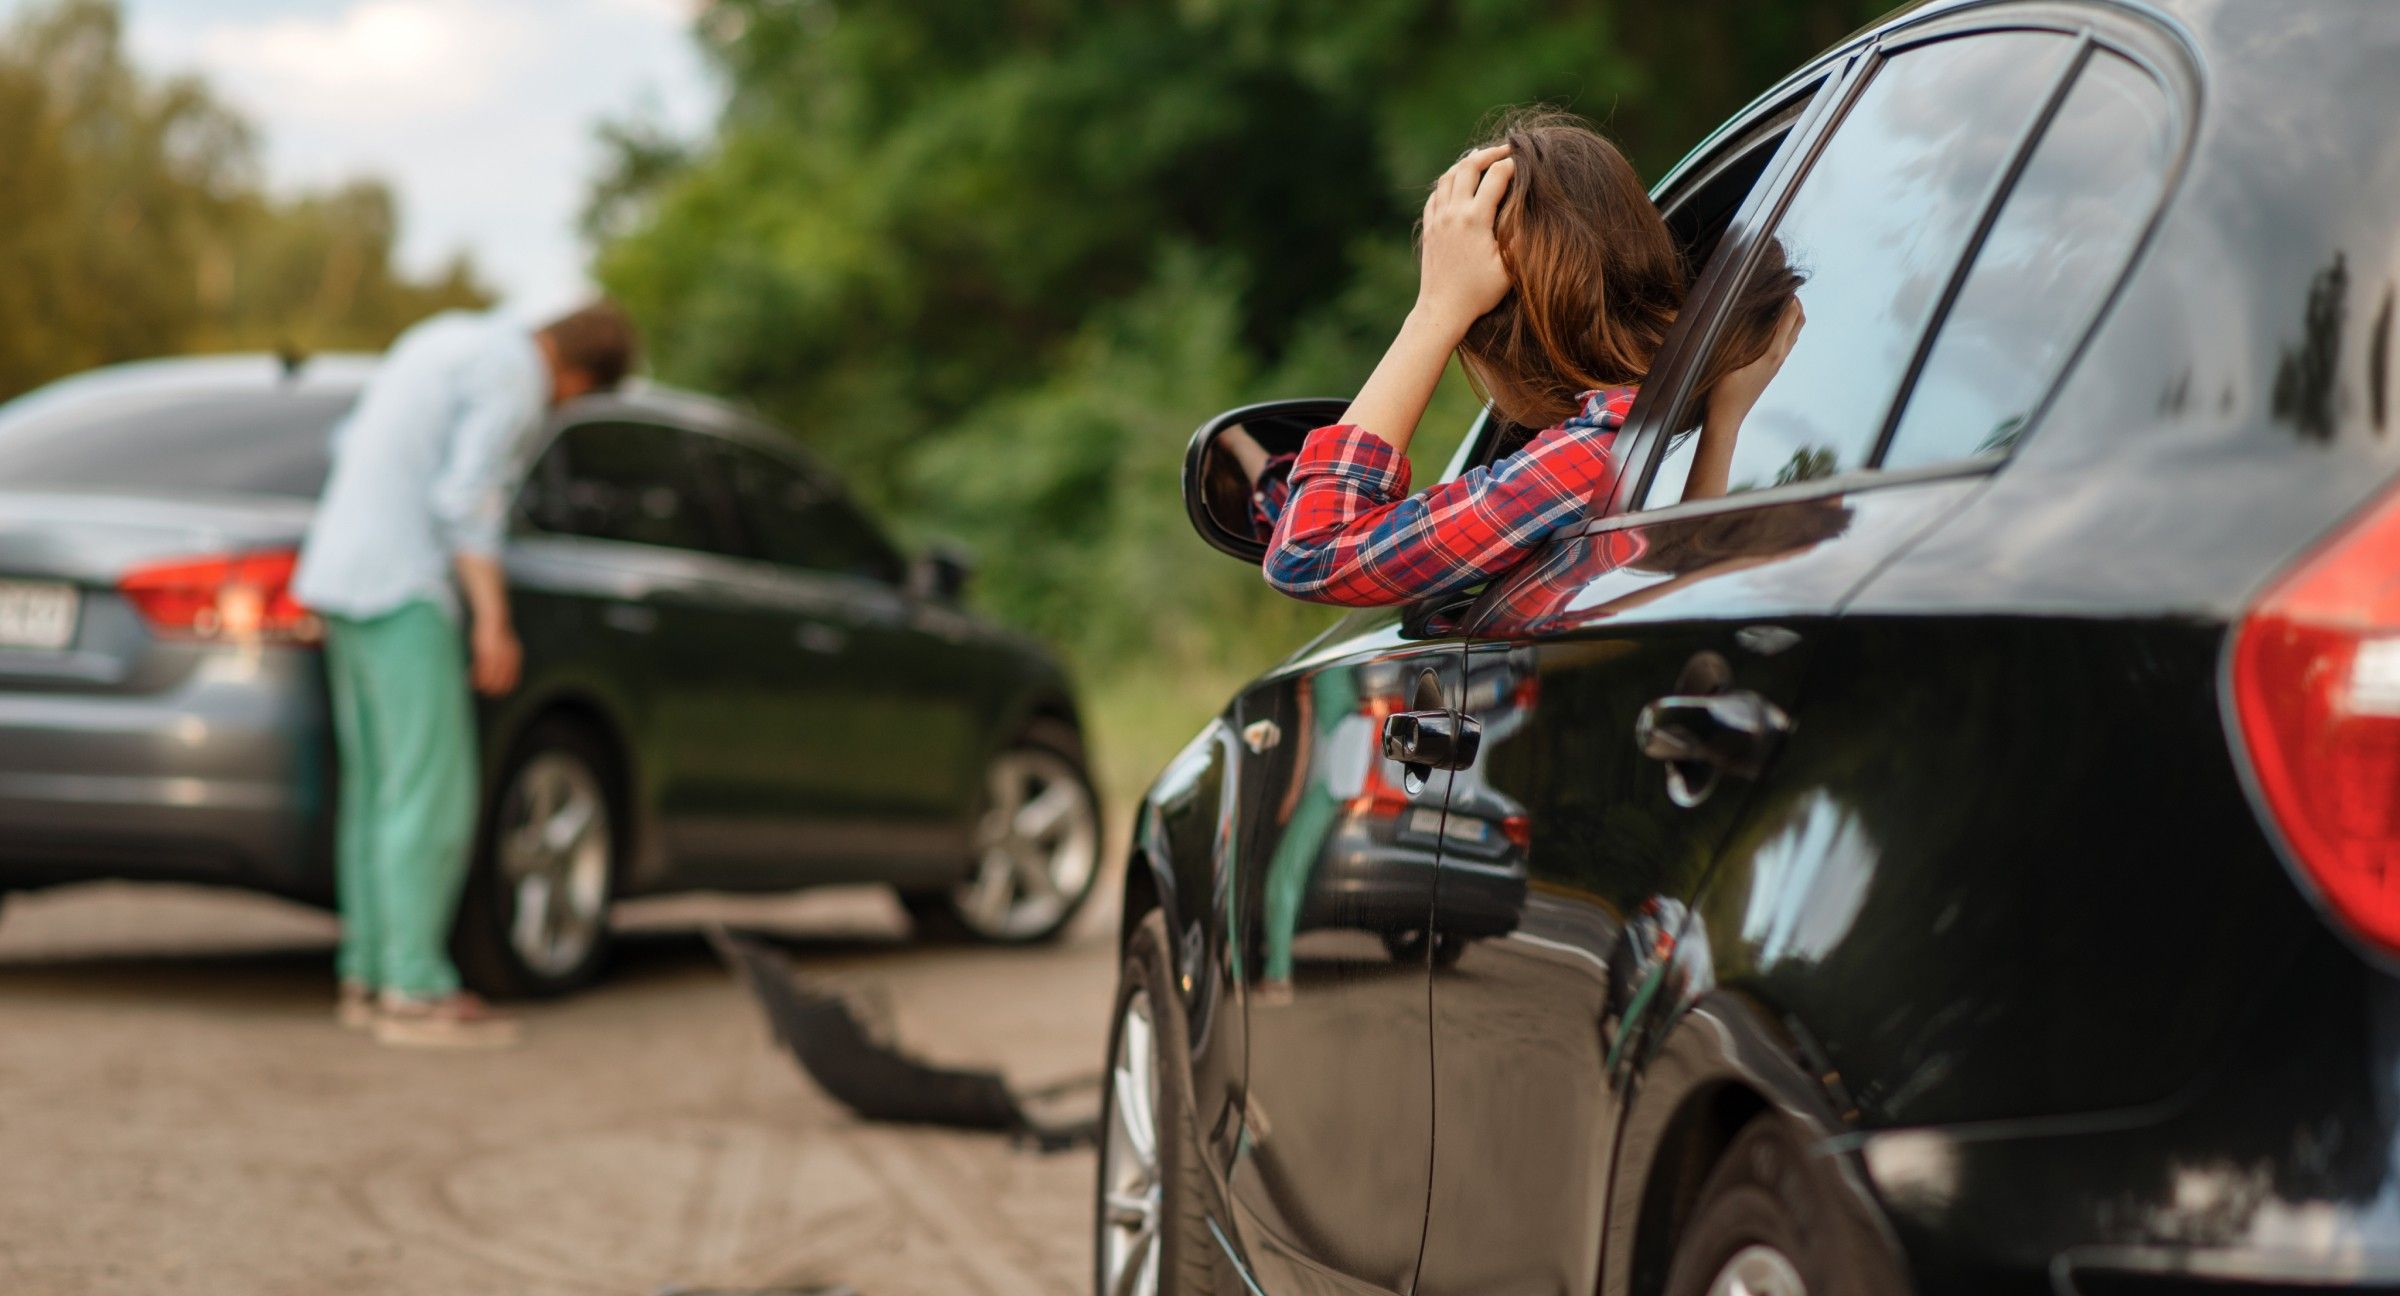 What To Do After a Turo Accident if You Need An Attorney